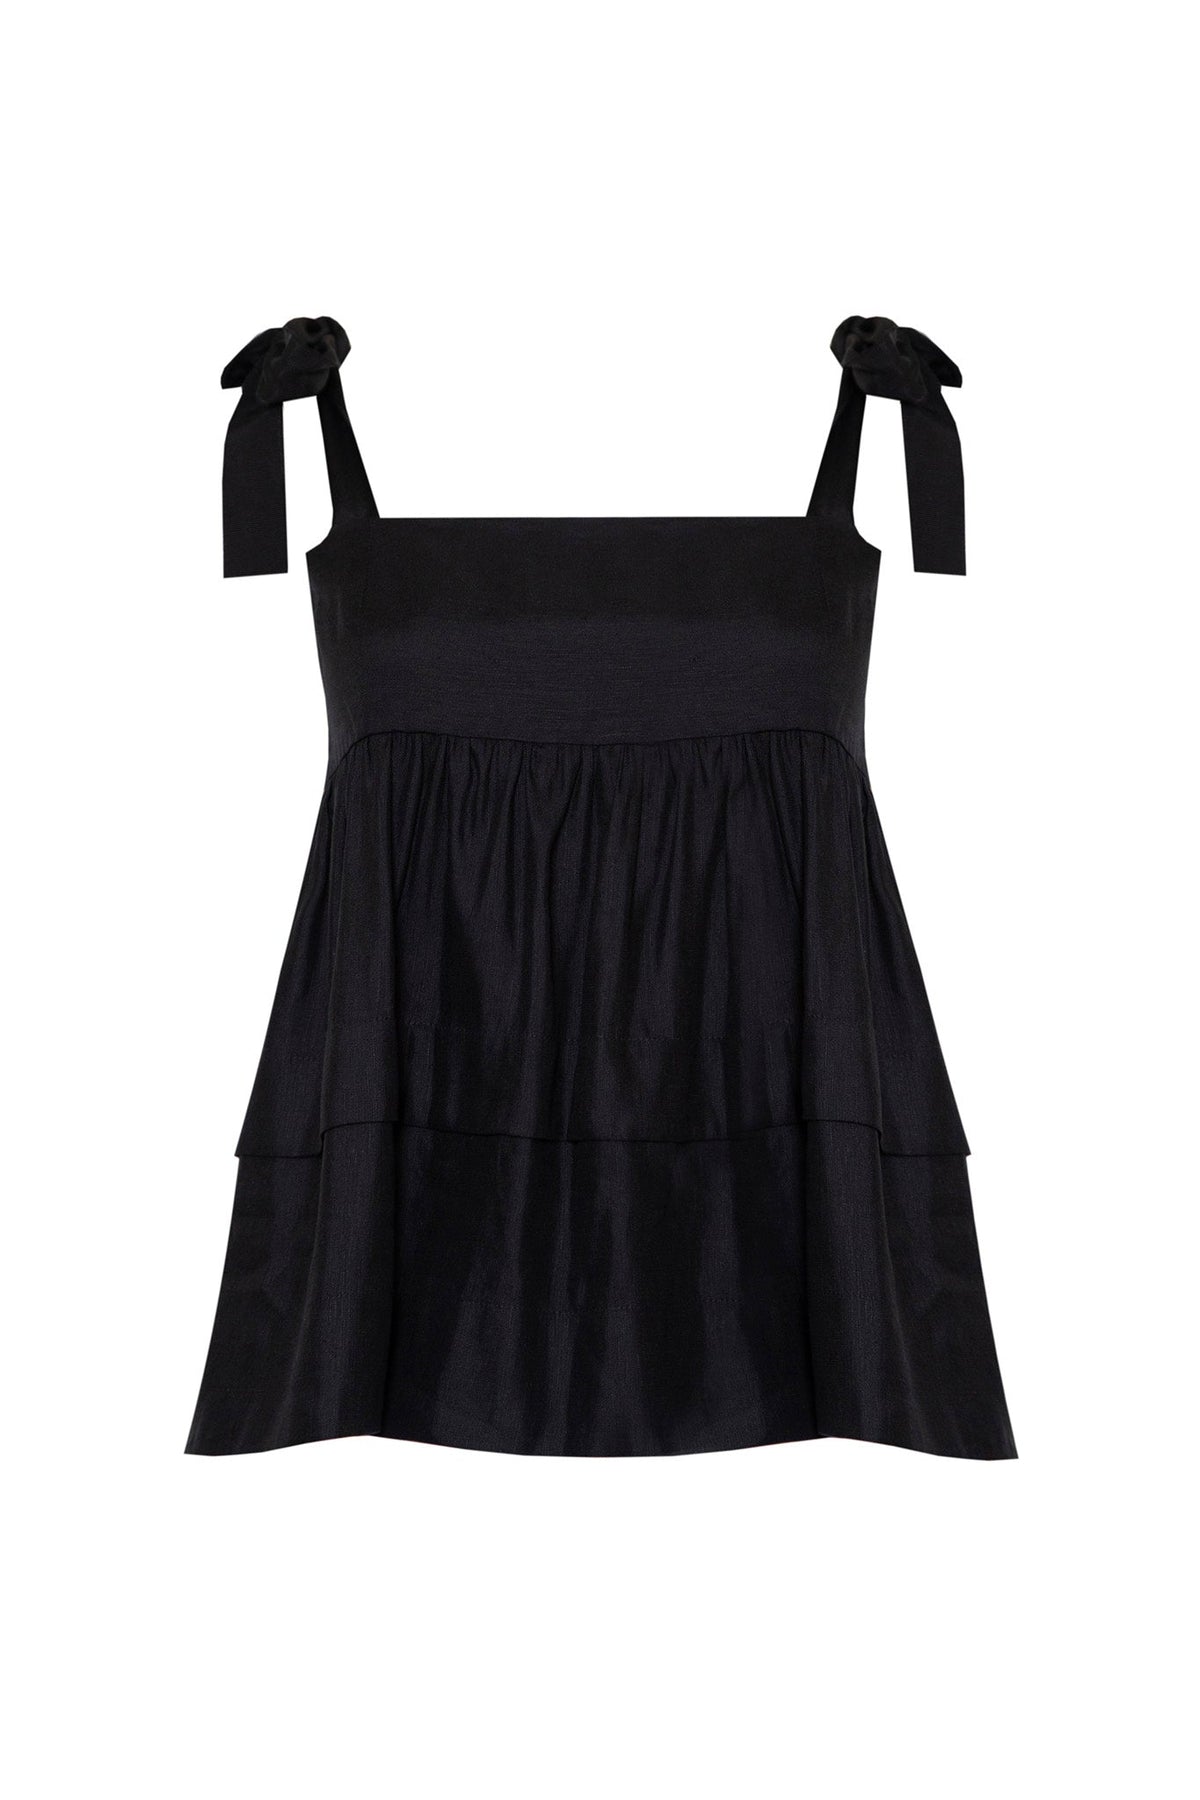 The Pruett top has self tie straps and an empire waist with tiered panels for a flowy silhouette.